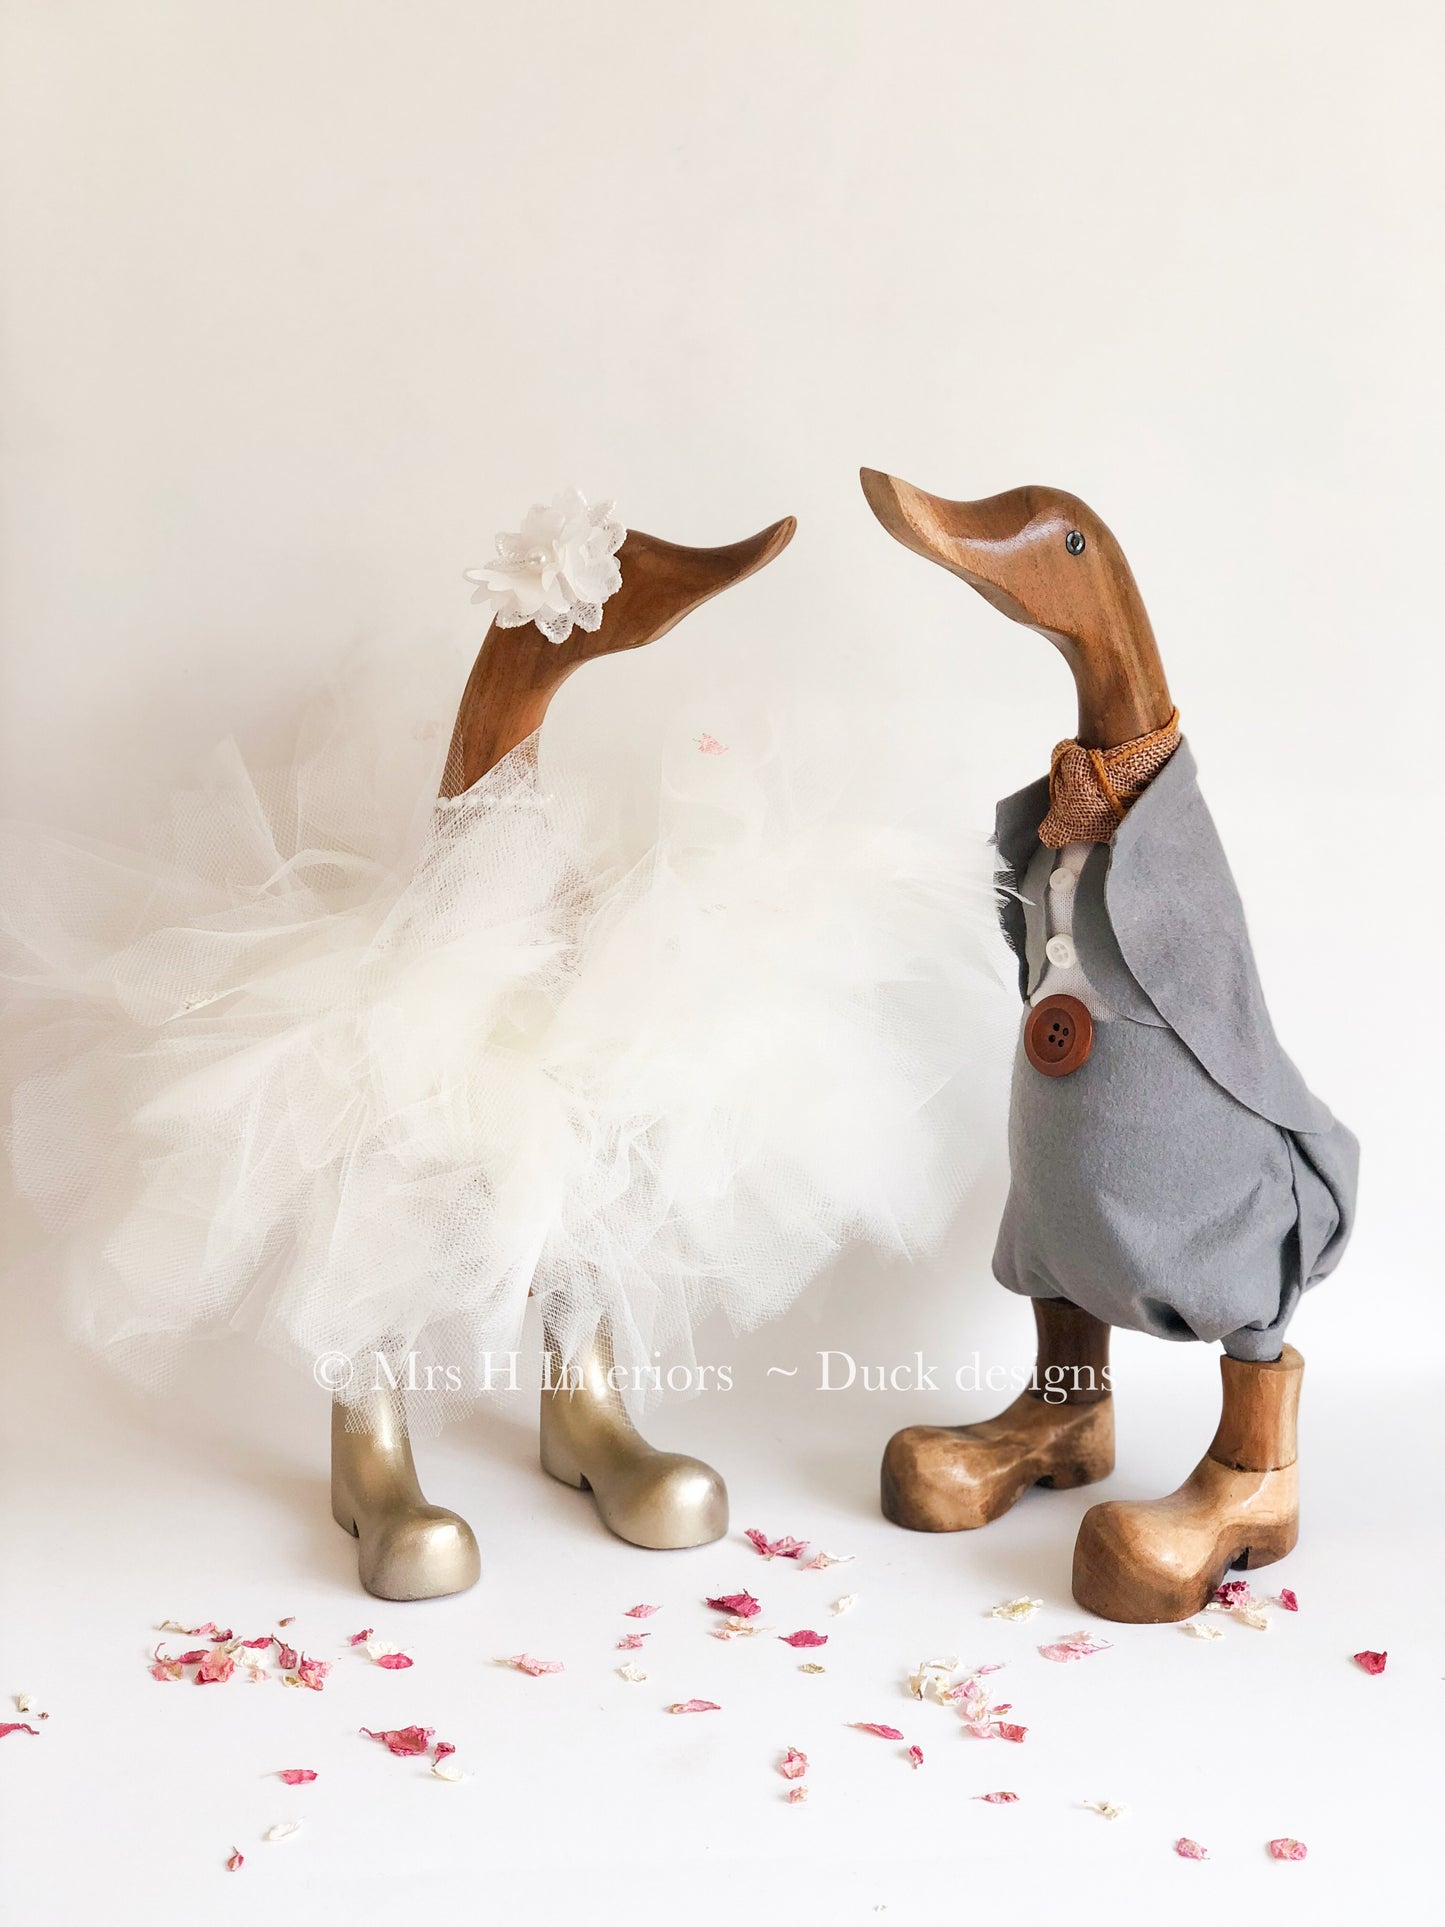 Bridal Couple - Tutu Bride & Grey Groom Wedding Pair - Decorated Wooden Duck in Boots by Mrs H the Duck Lady